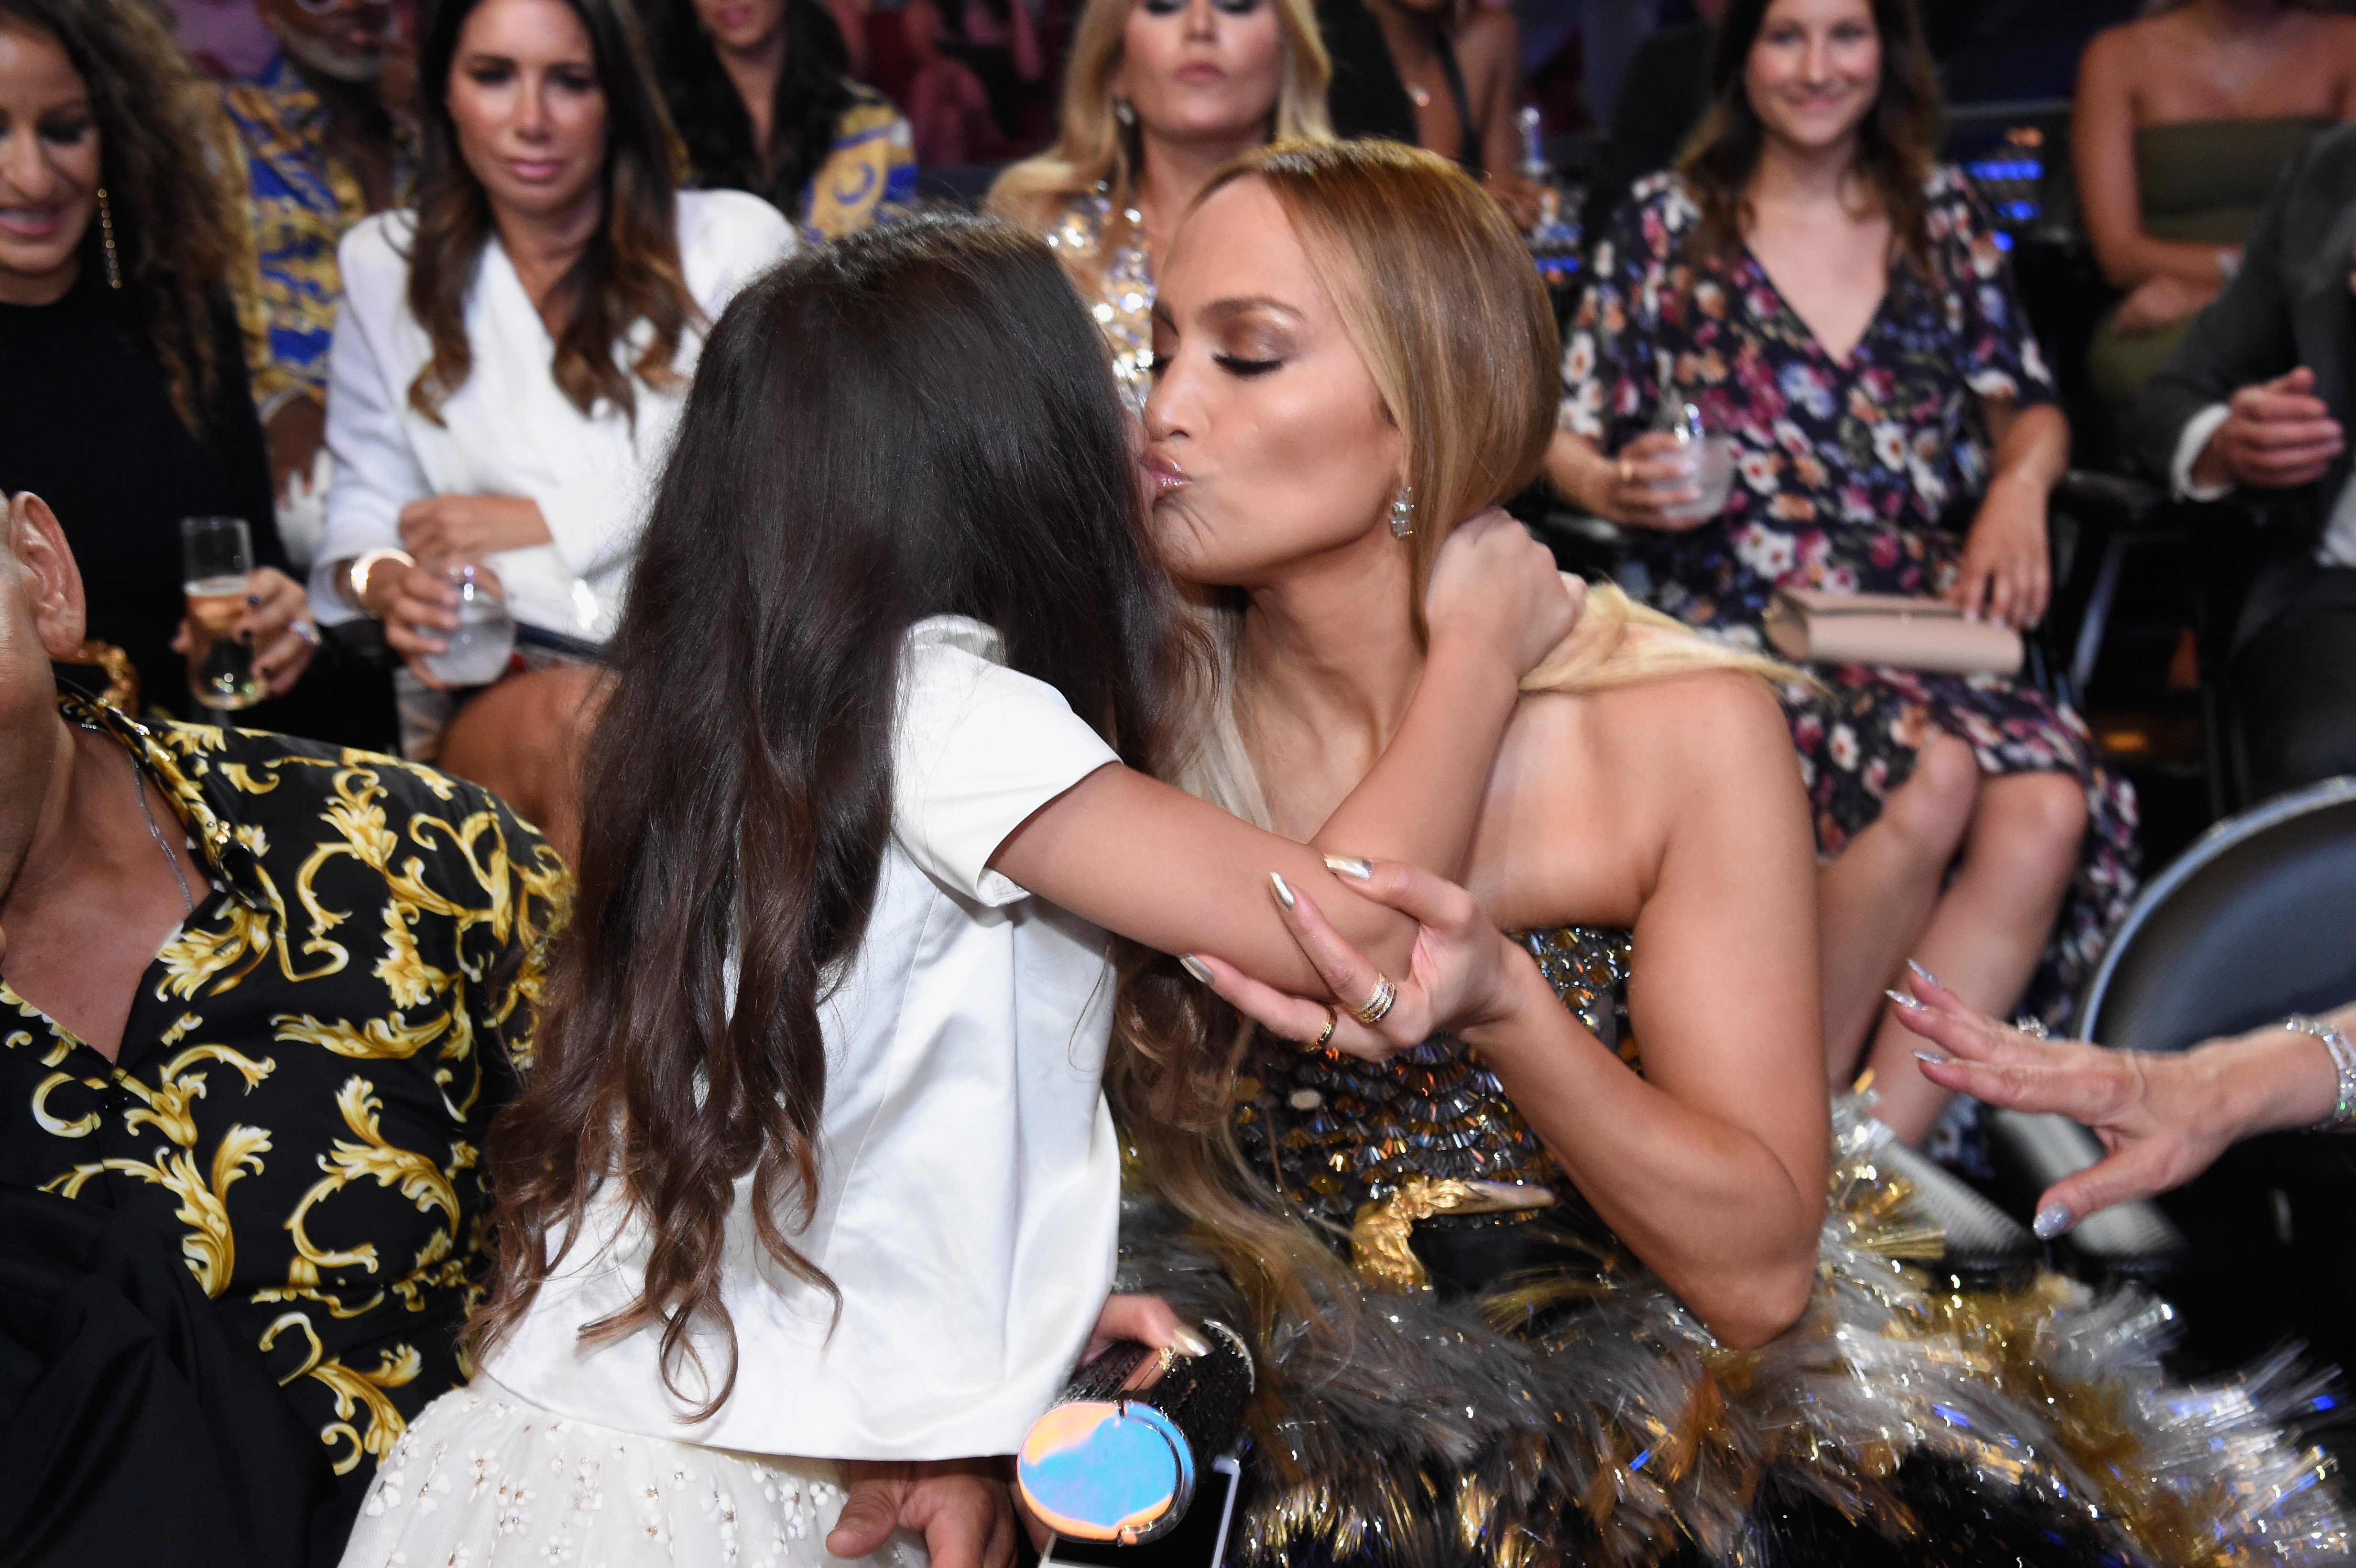  Emme Maribel Muniz and Jennifer Lopez during the 2018 MTV Video Music Awards at Radio City Music Hall on August 20, 2018 in New York City. | Source: Getty Images